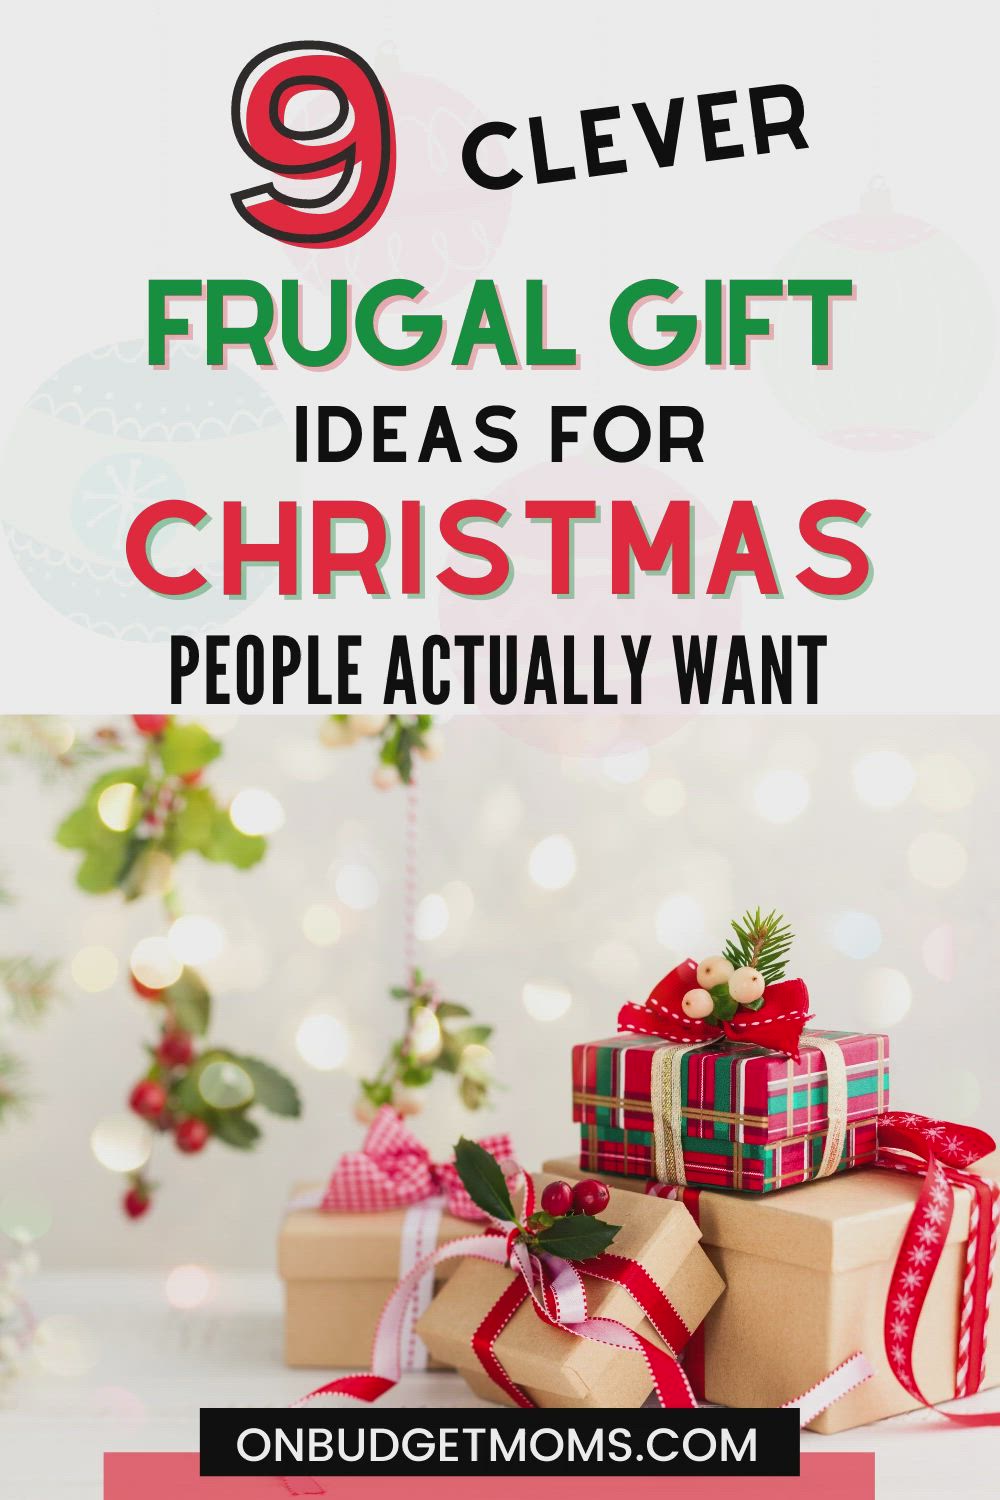 This may contain: presents are stacked on top of each other with the words 9 clever frugal gift ideas for christmas people actually want